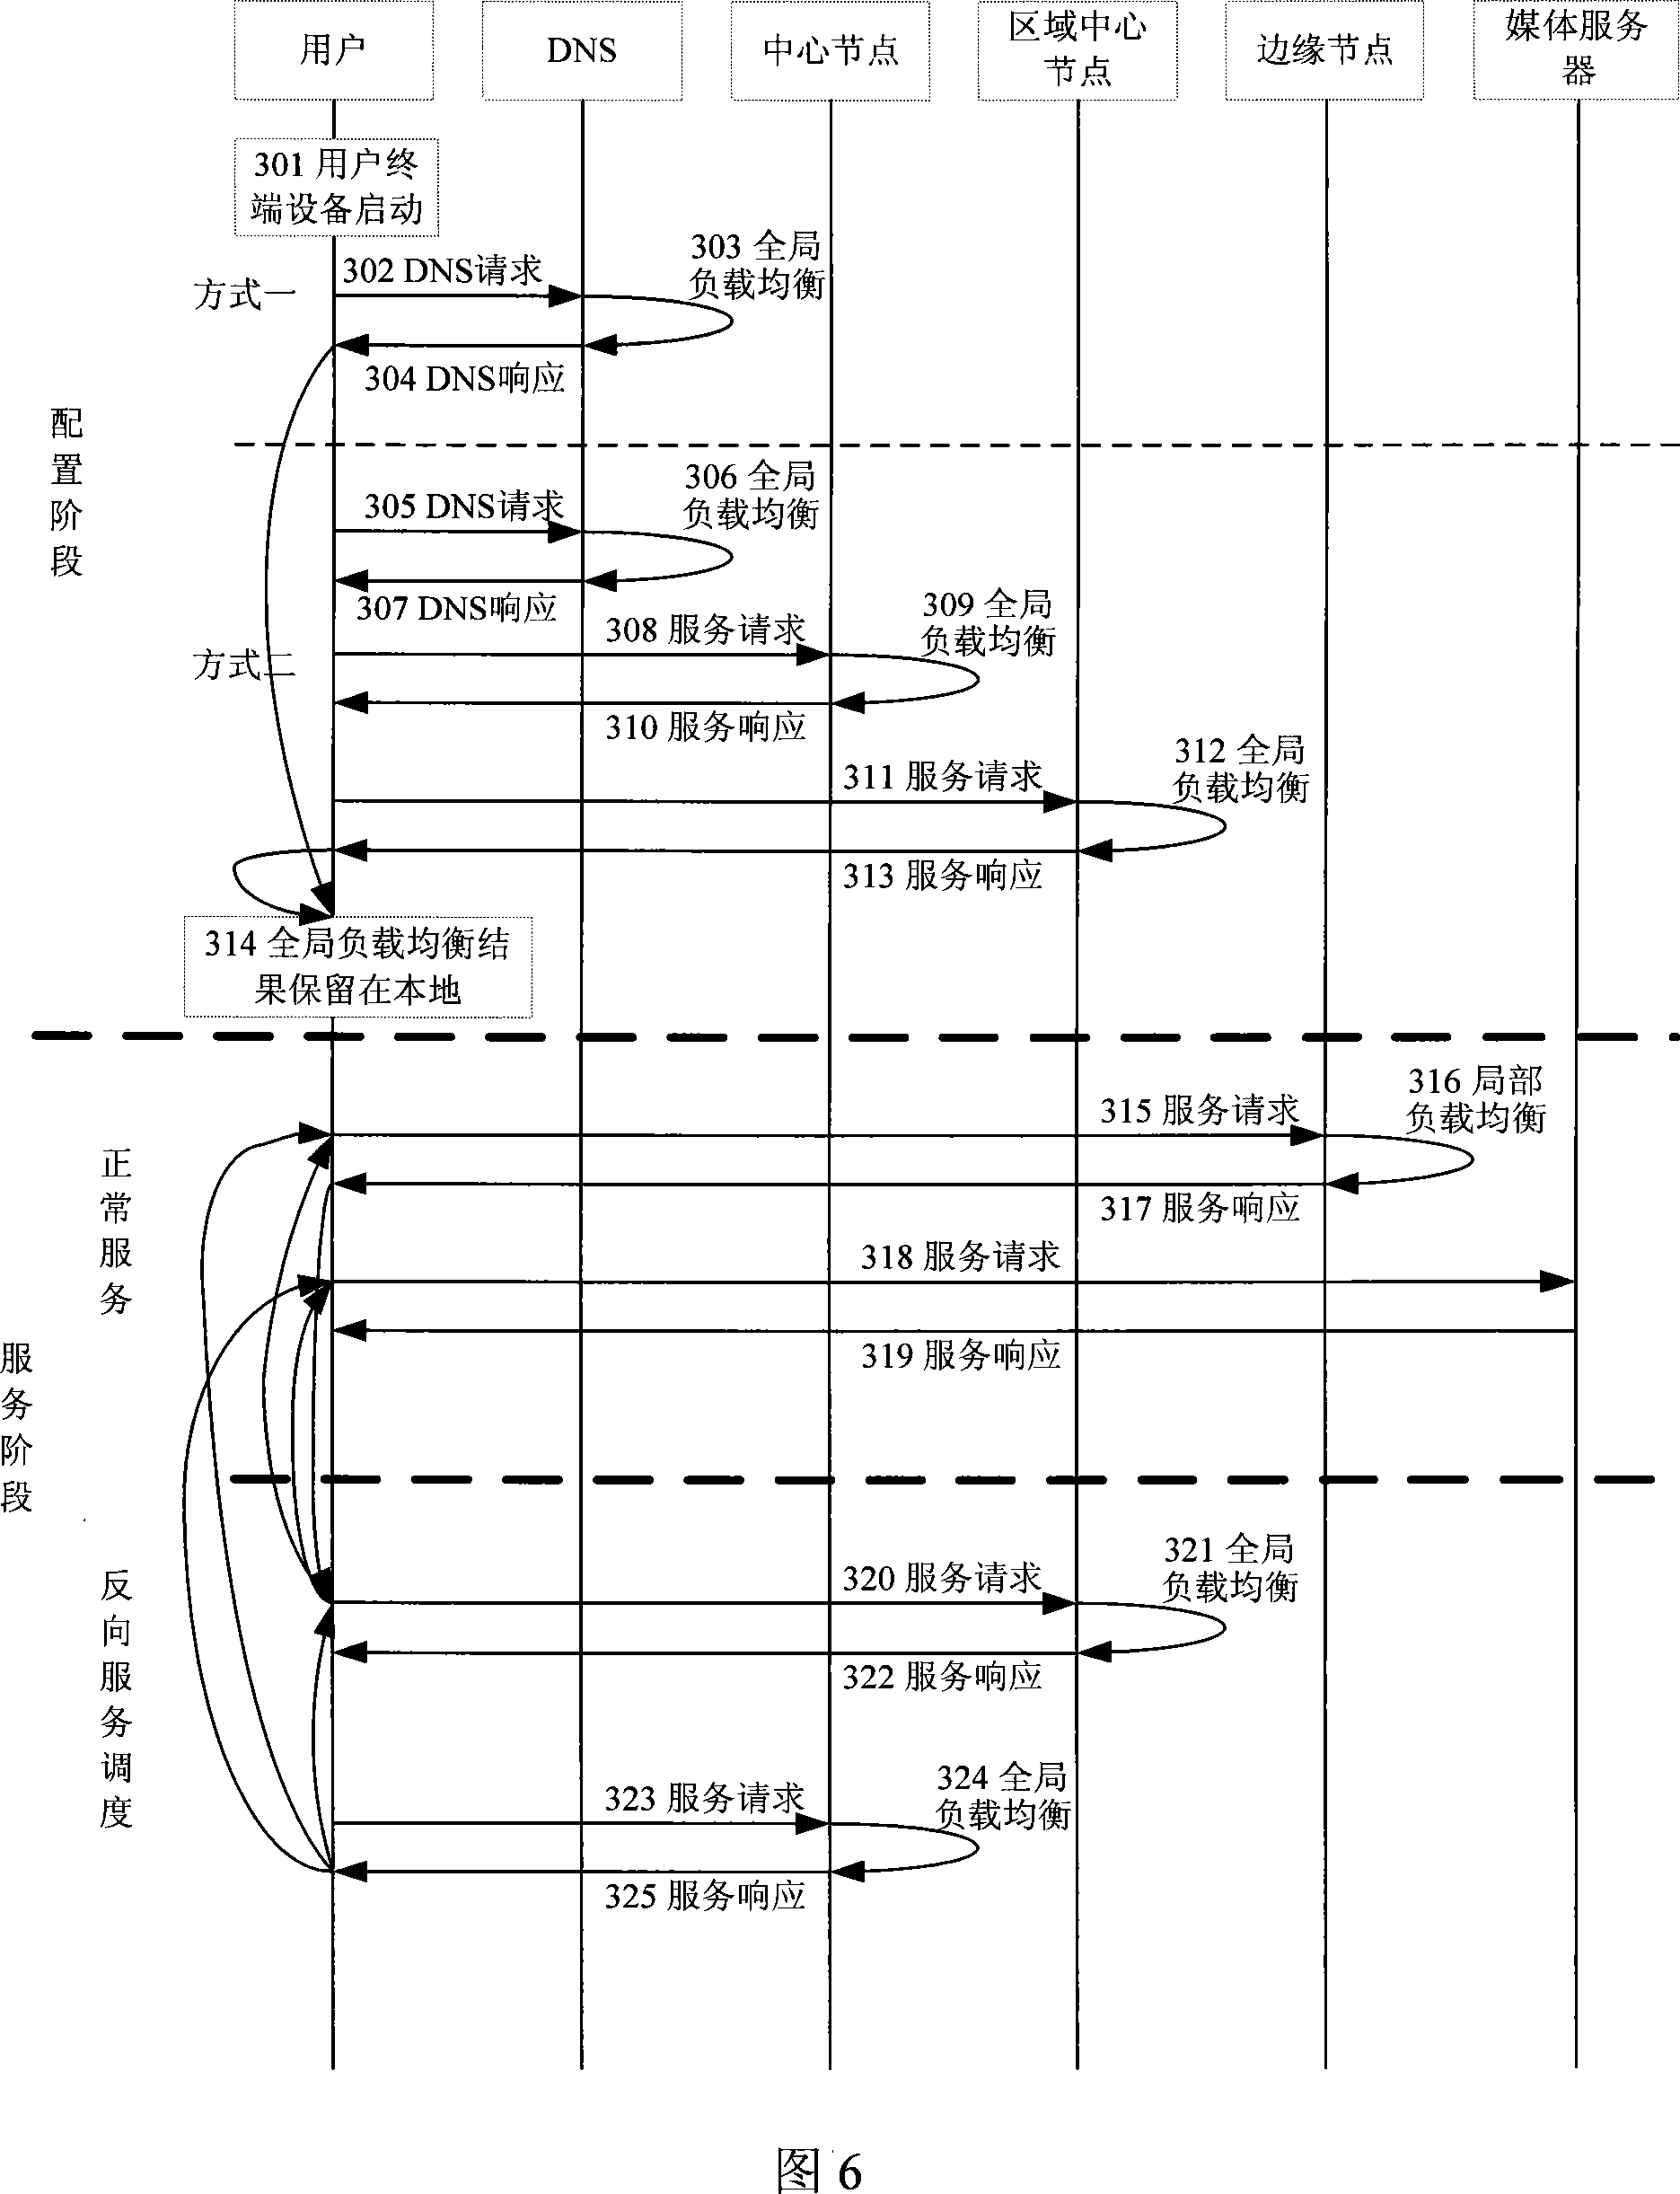 Service scheduling method for interactive television system